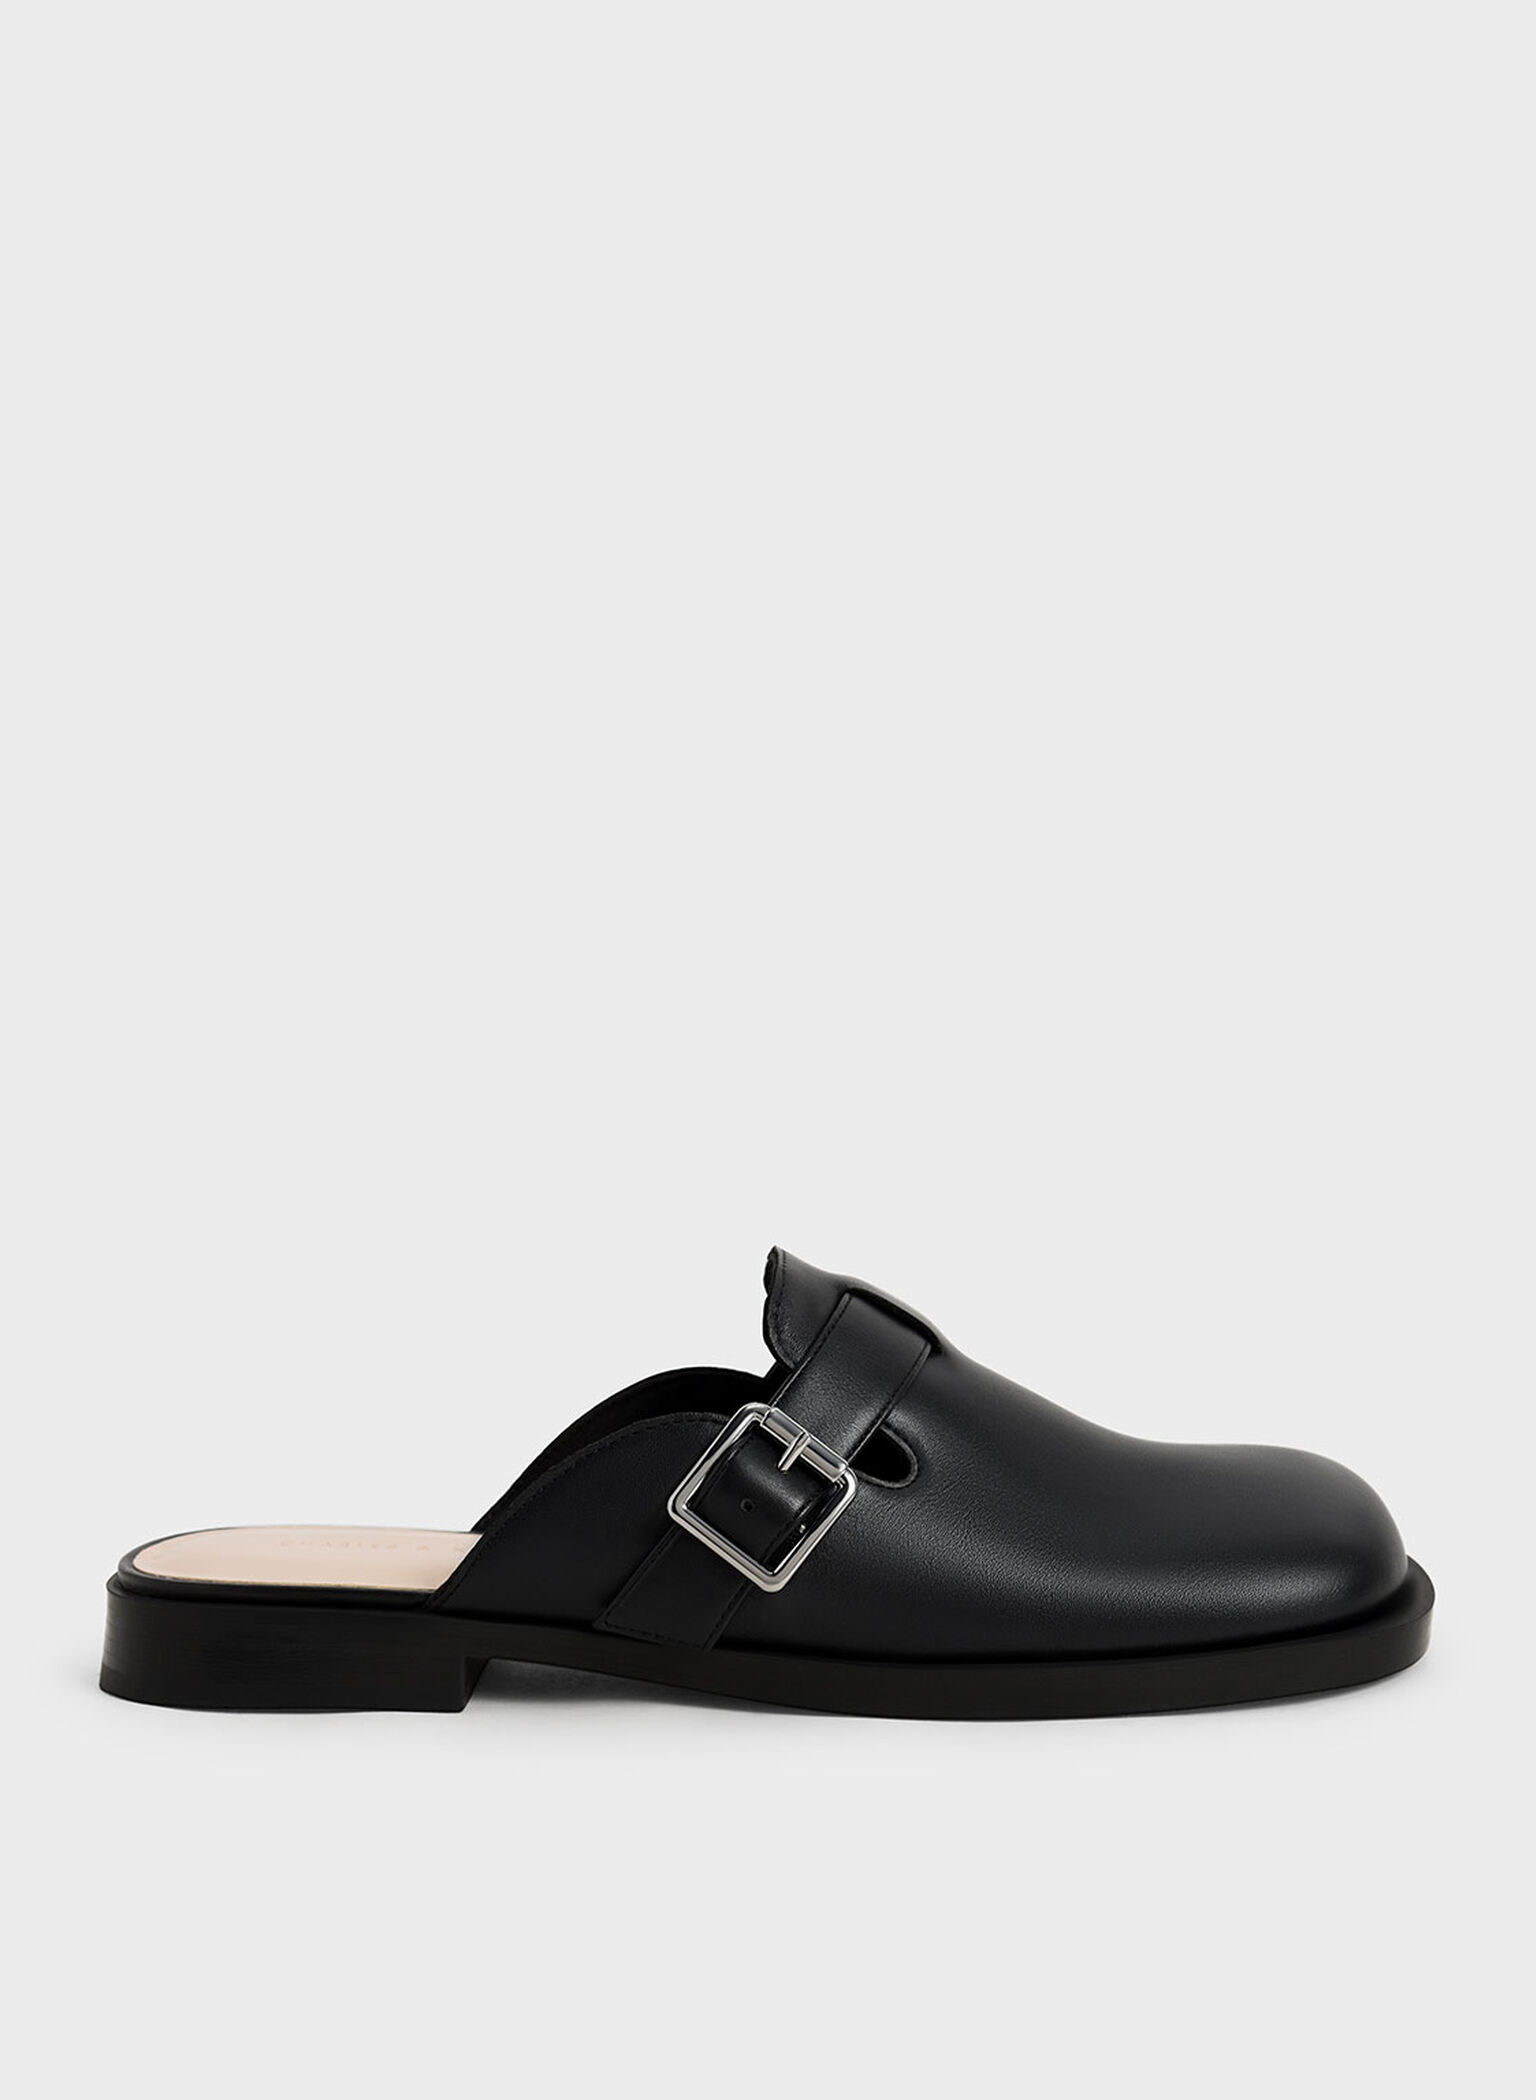 Black Buckled Round-Toe Loafer Mules - CHARLES & KEITH US